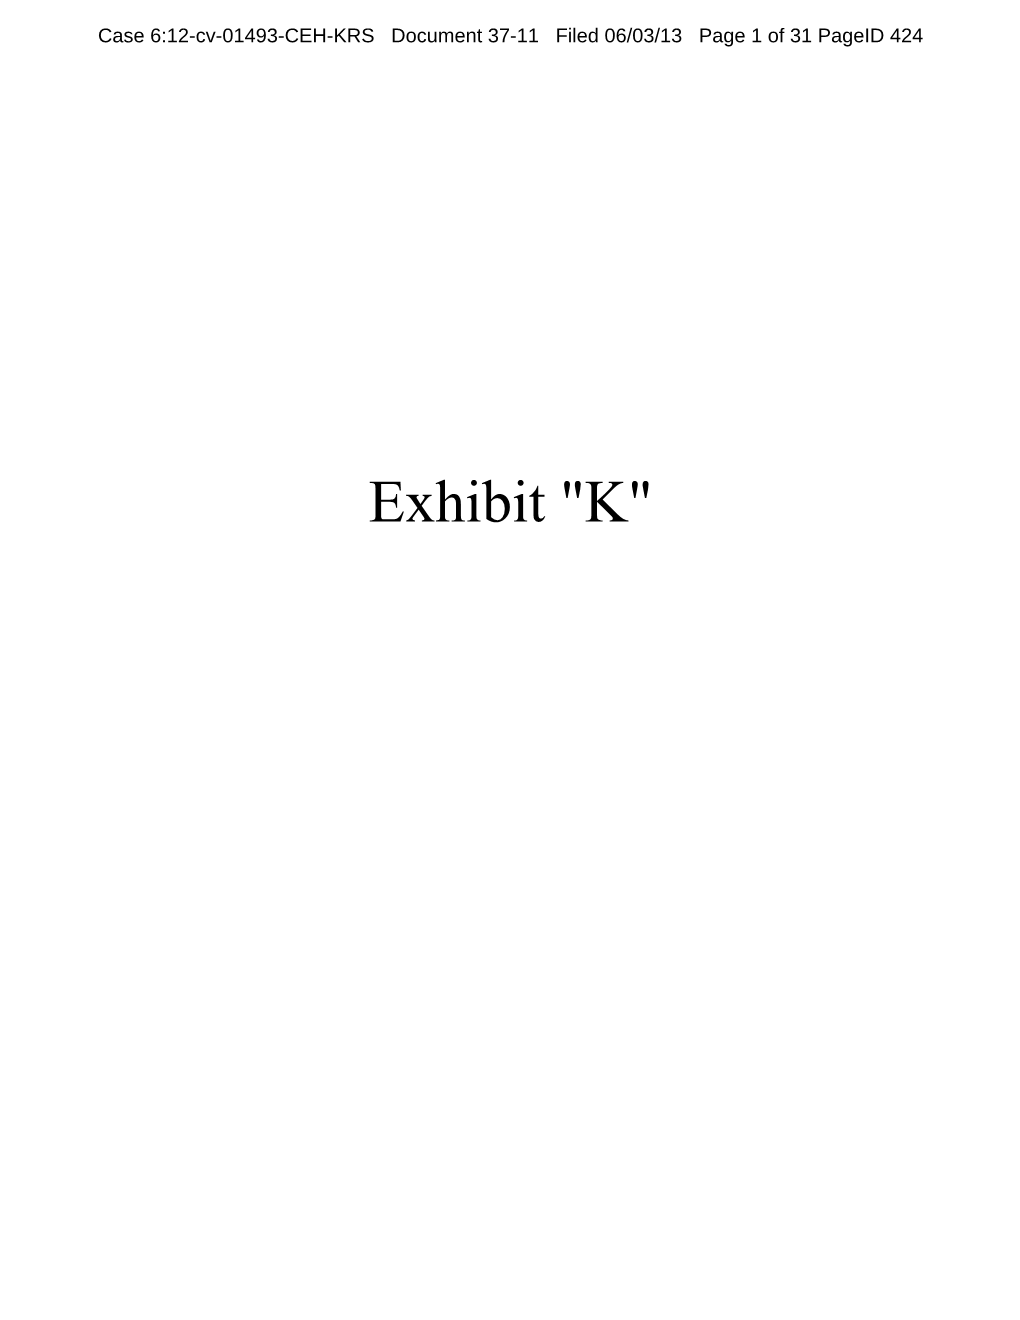 Exhibit "K" Case 6:12-Cv-01493-CEH-KRS Document 37-11 Filed 06/03/13 Page 2 of 31 Pageid 425